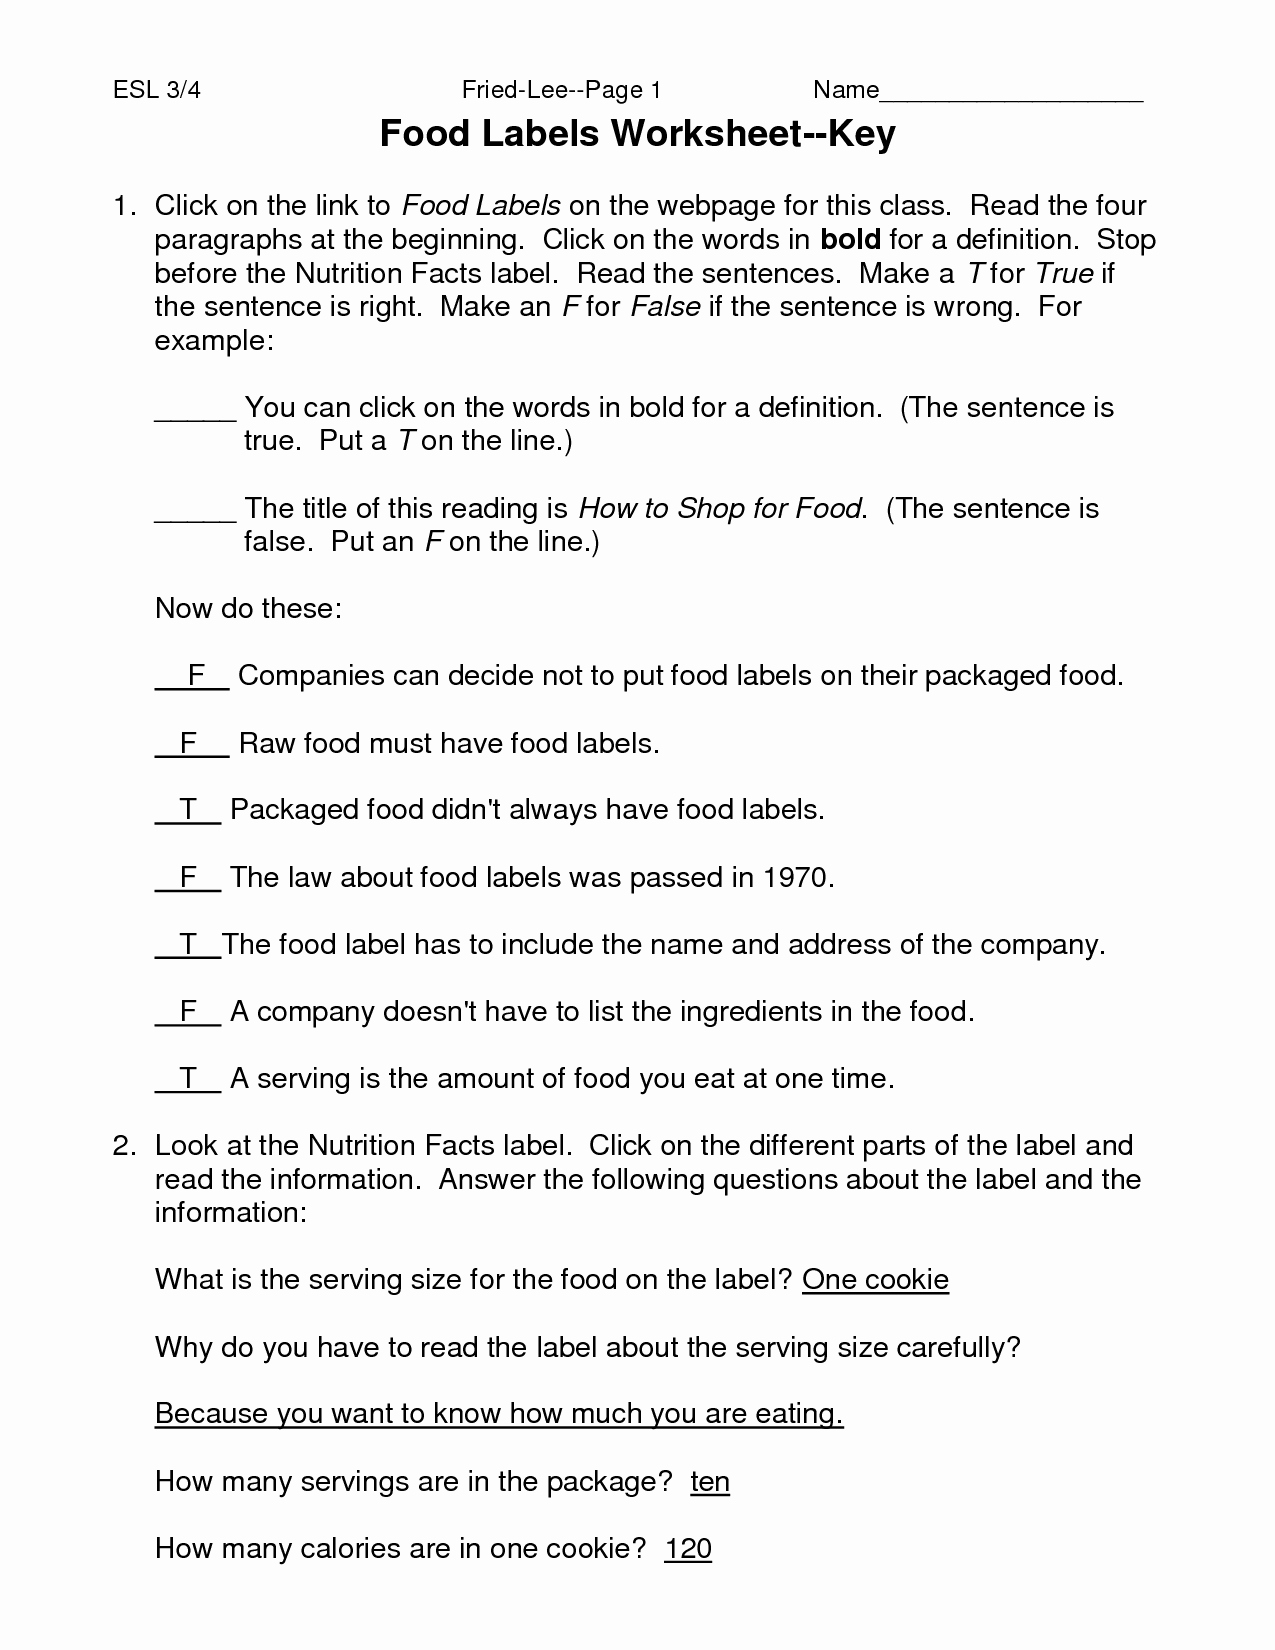 Nutrition Label Worksheet Answers Awesome 15 Best Of Food Label Worksheet Food and